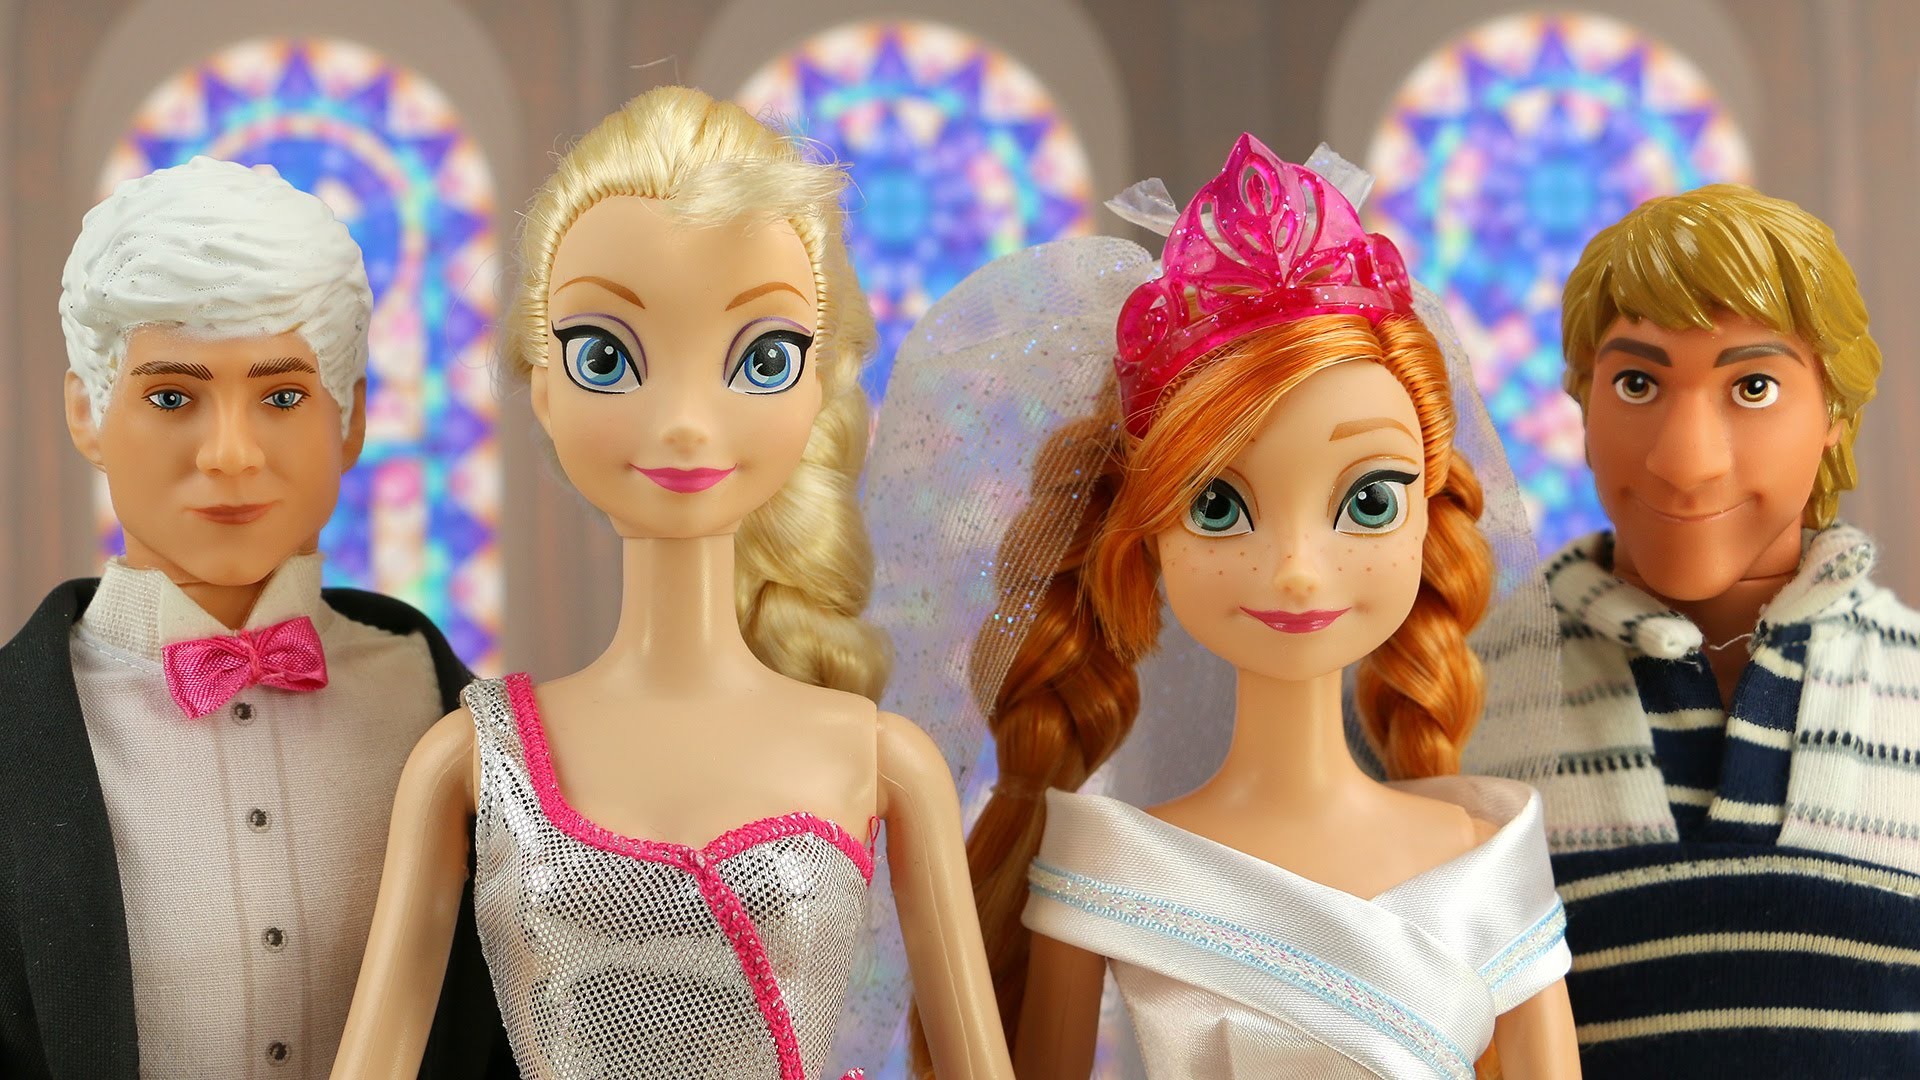 1920x1080 Anna and Jack Frost Wedding - Can Frozen Elsa Stop It in Time?  DisneyToysFan - YouTube